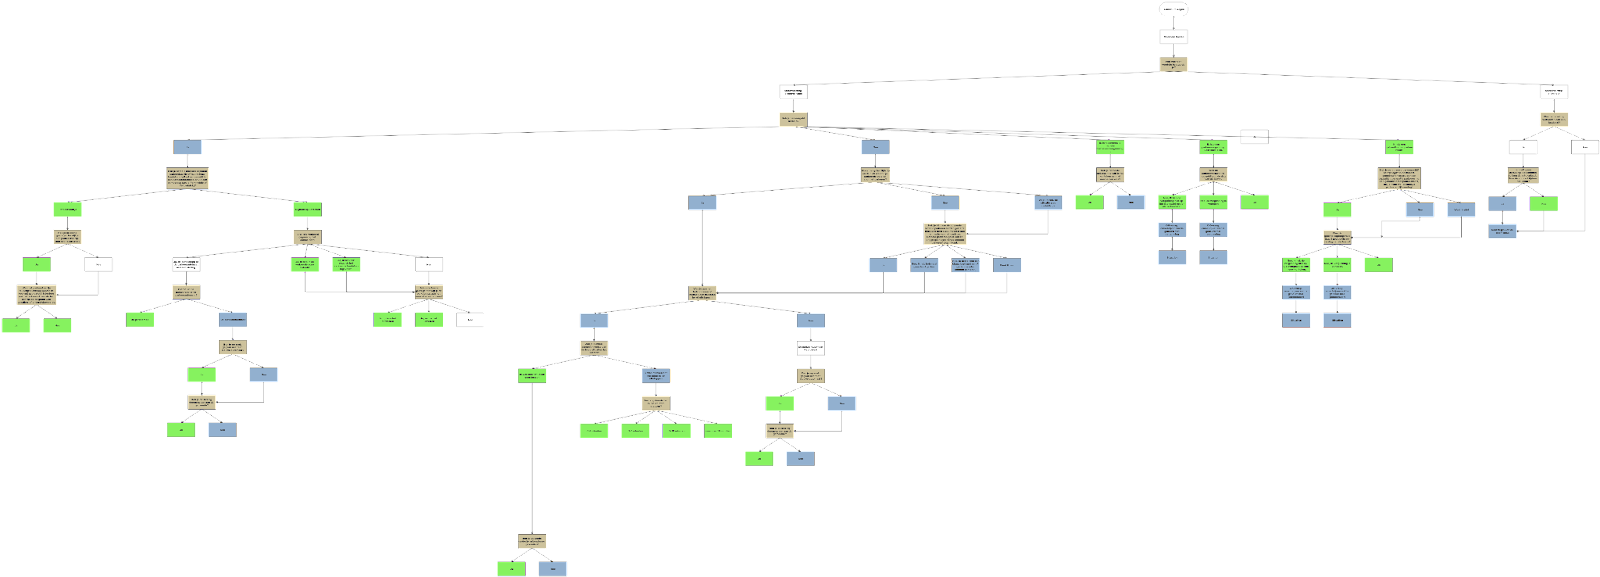 Example visualization of the decision tree for a municipal parking ticket